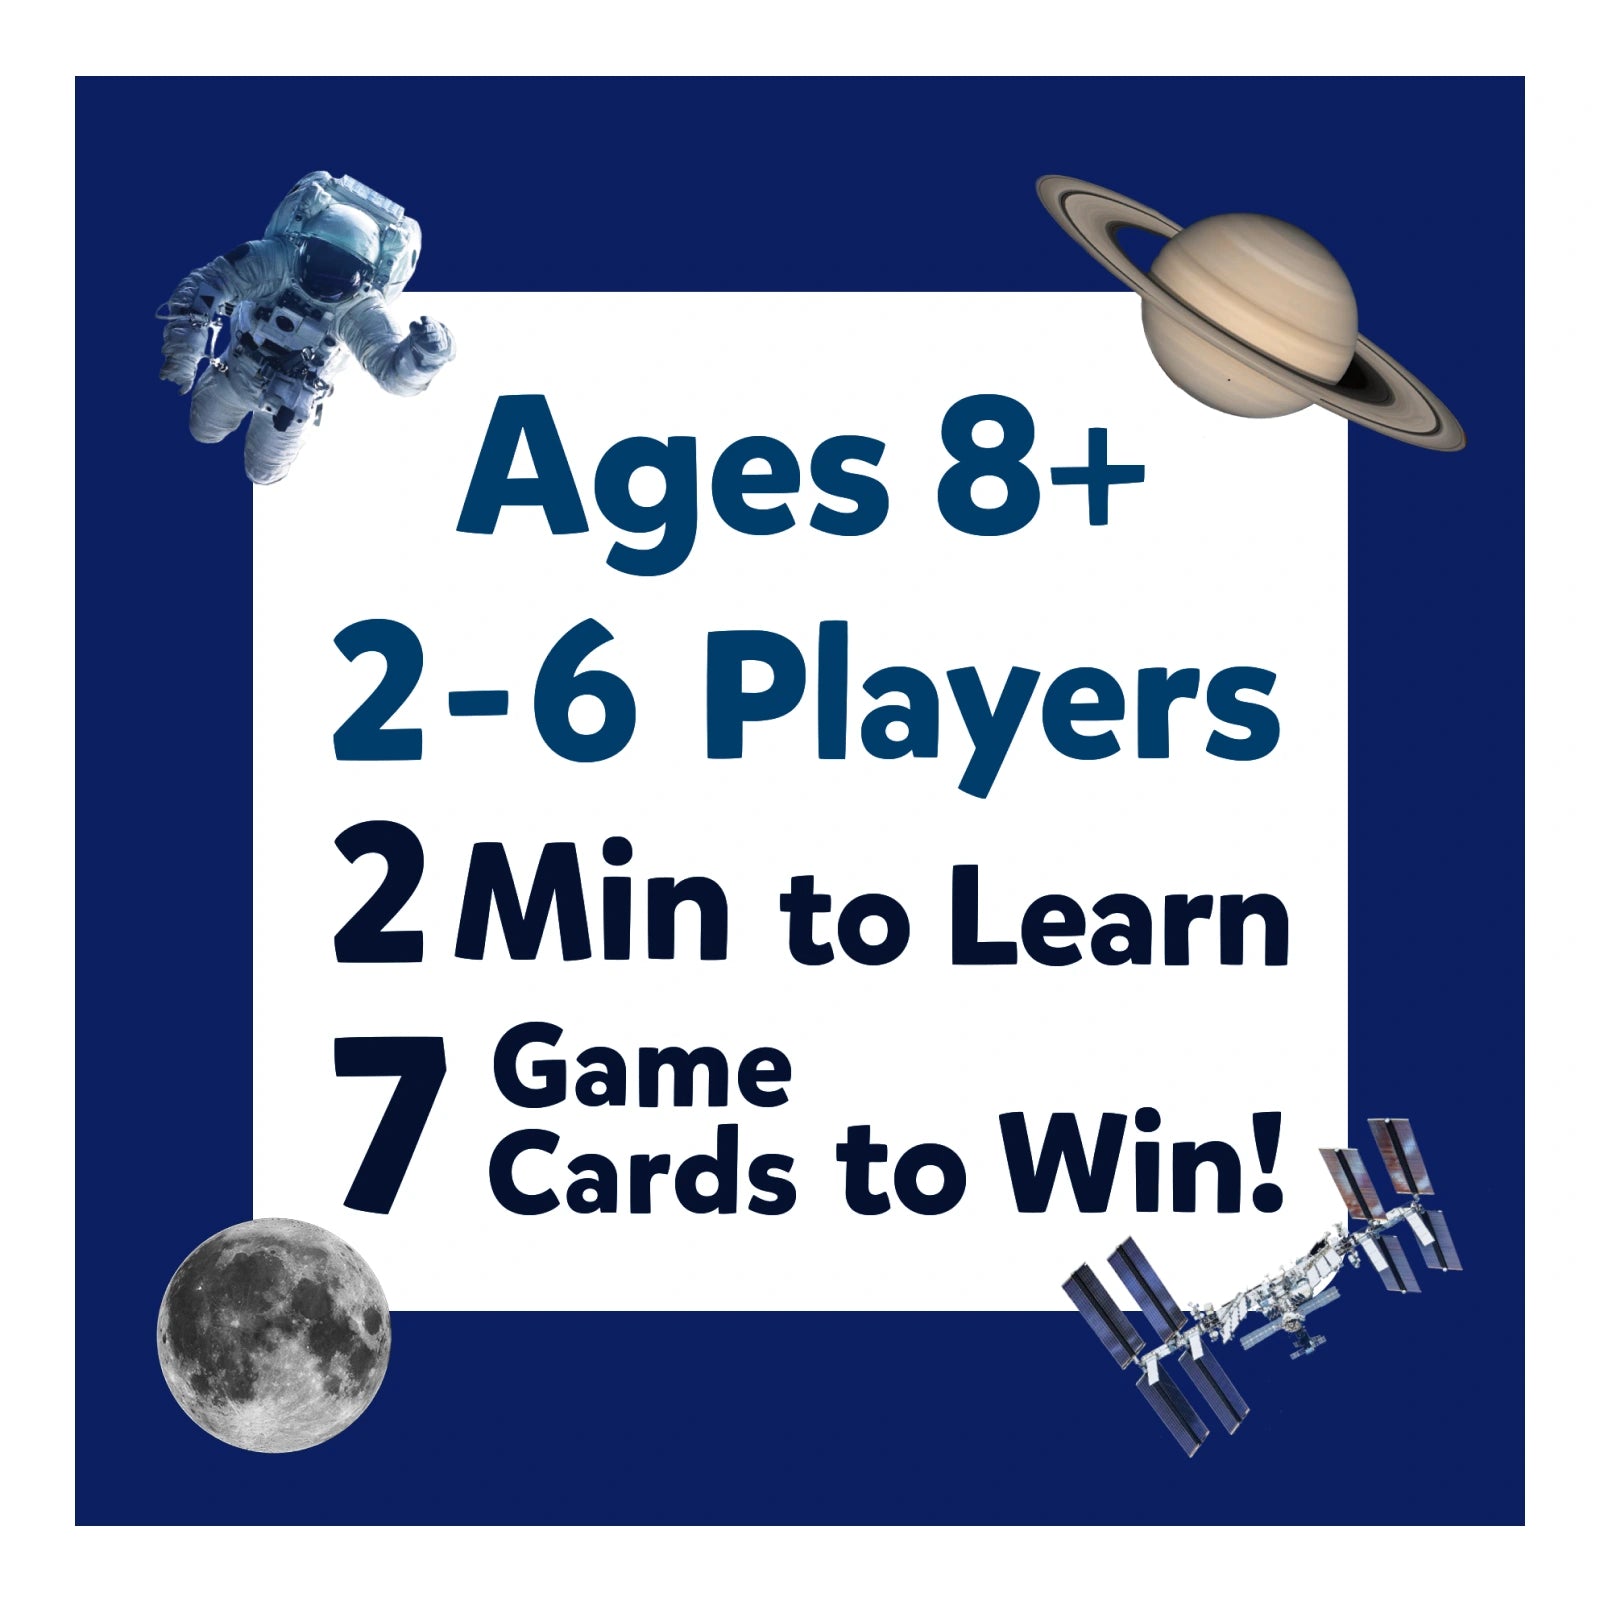 Guess in 10: All About Space | Trivia card game (ages 8+)